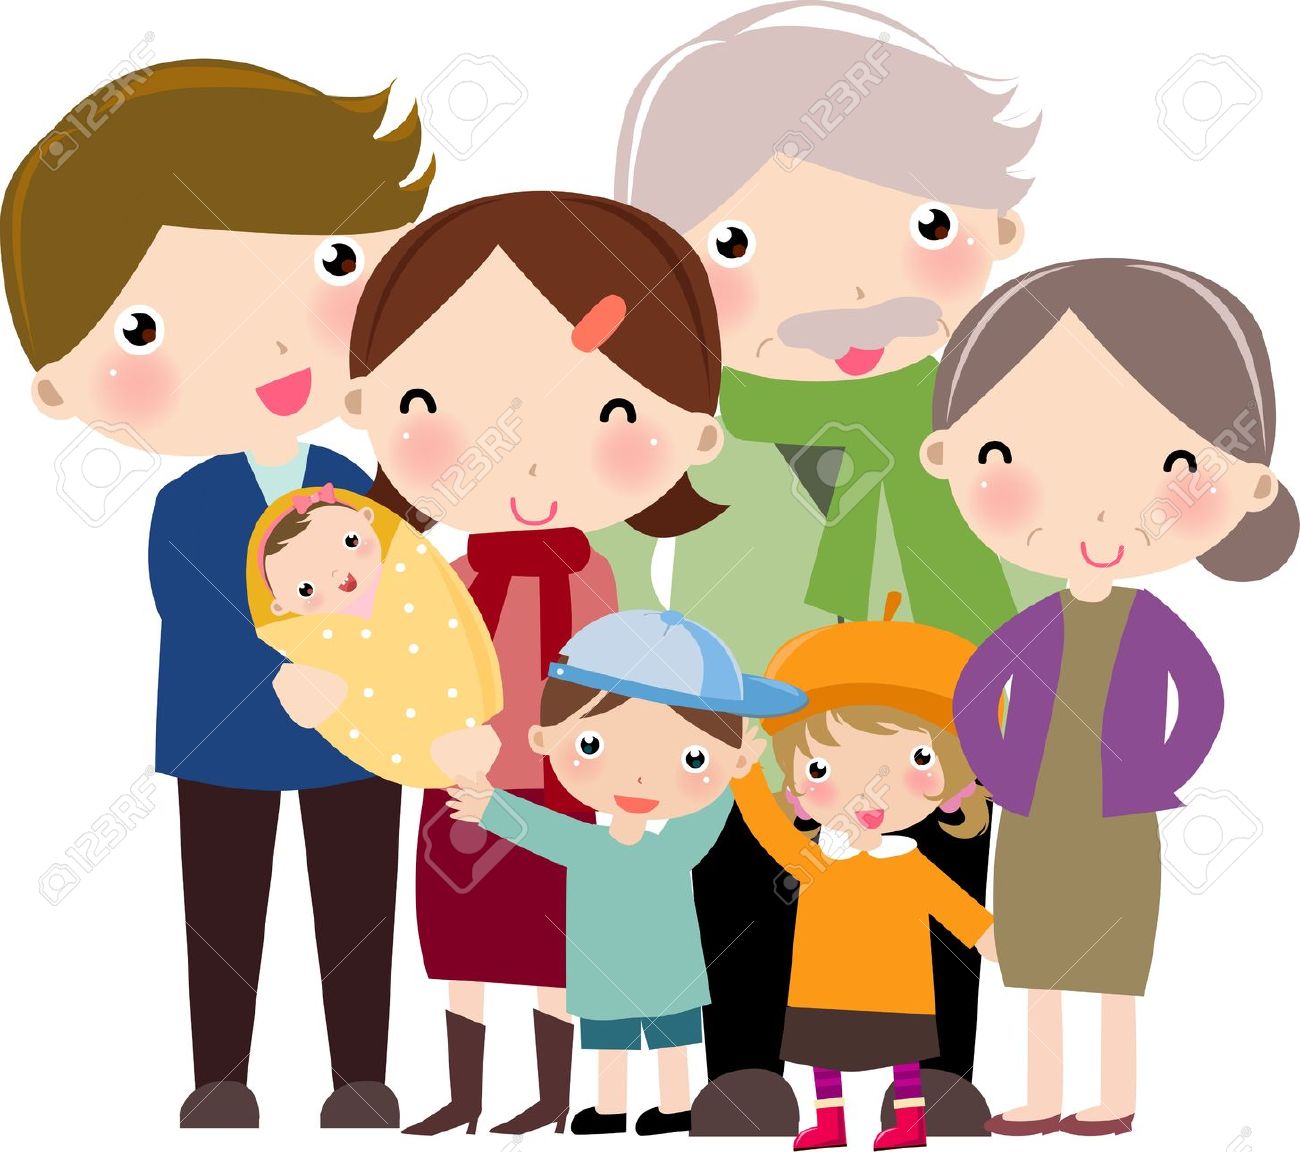 Family clip art free printable clipart images 9